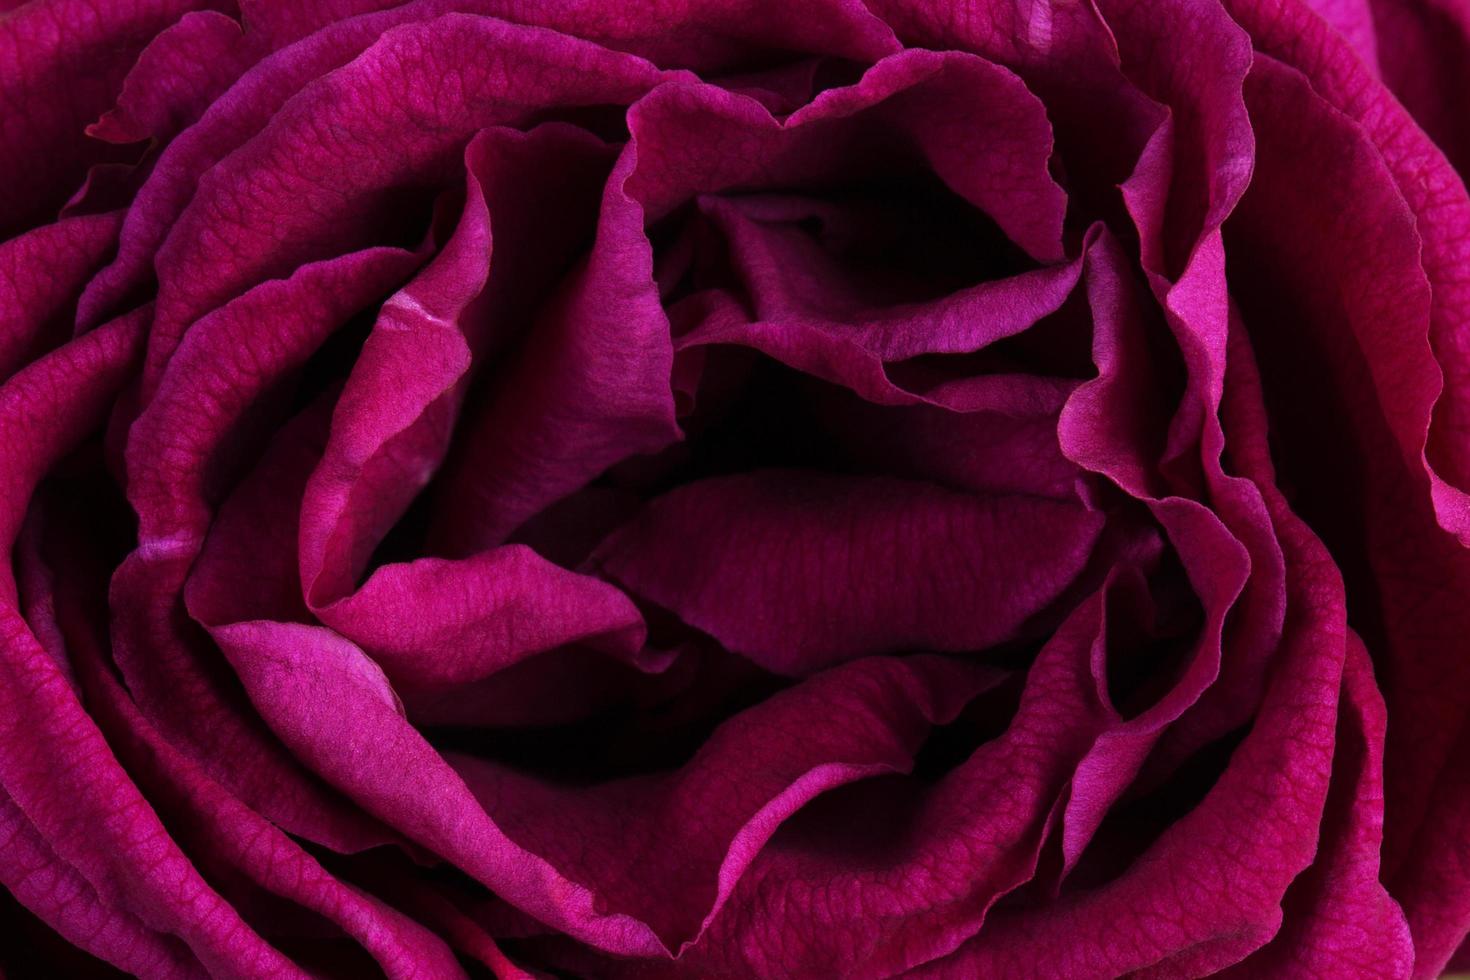 Wither rose burgundy photo